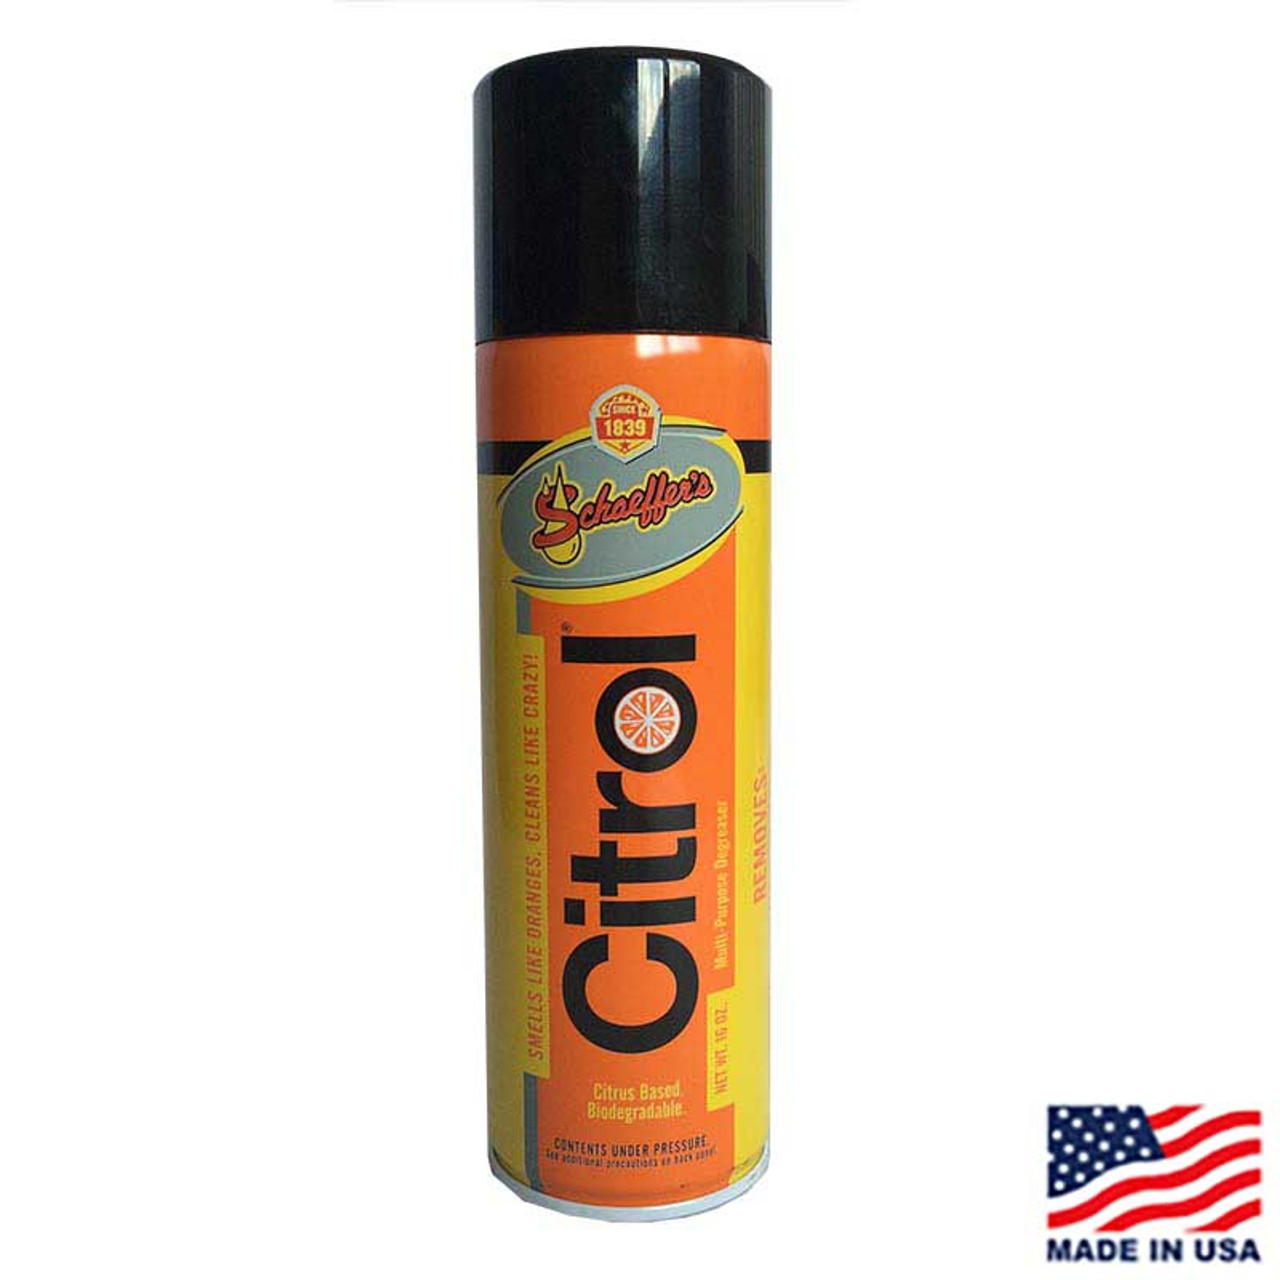 Citrol 266 heavy Duty Degreaser!! How to safely use it on clear, painted  surfaces!! 